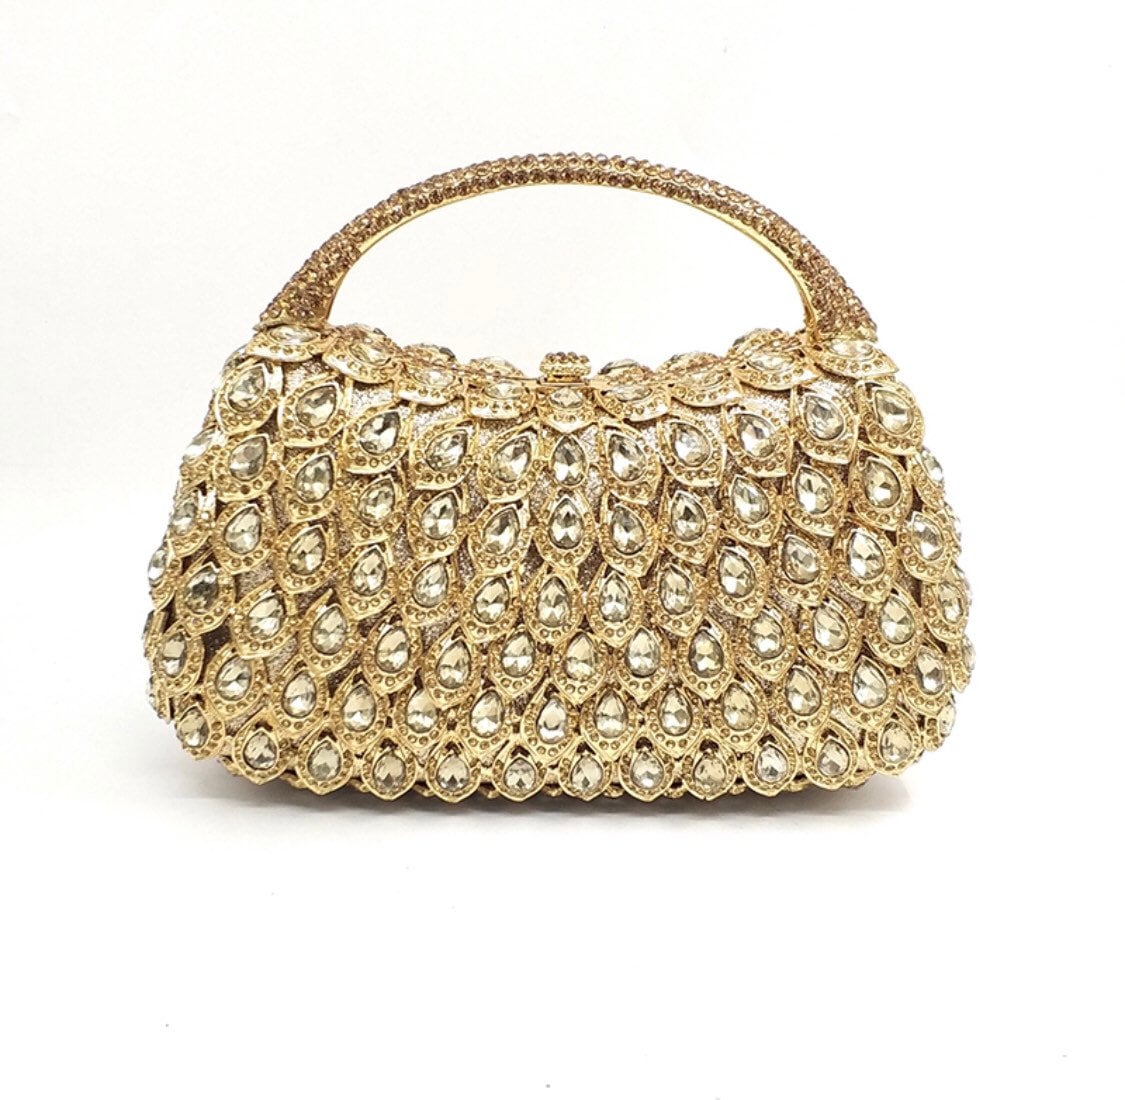 Handmade Diamond Pearl Bridal Beaded Clutch Purse New Style For Wedding,  Evening Party Shuoshuo65882133 From Ffre66, $26.14 | DHgate.Com